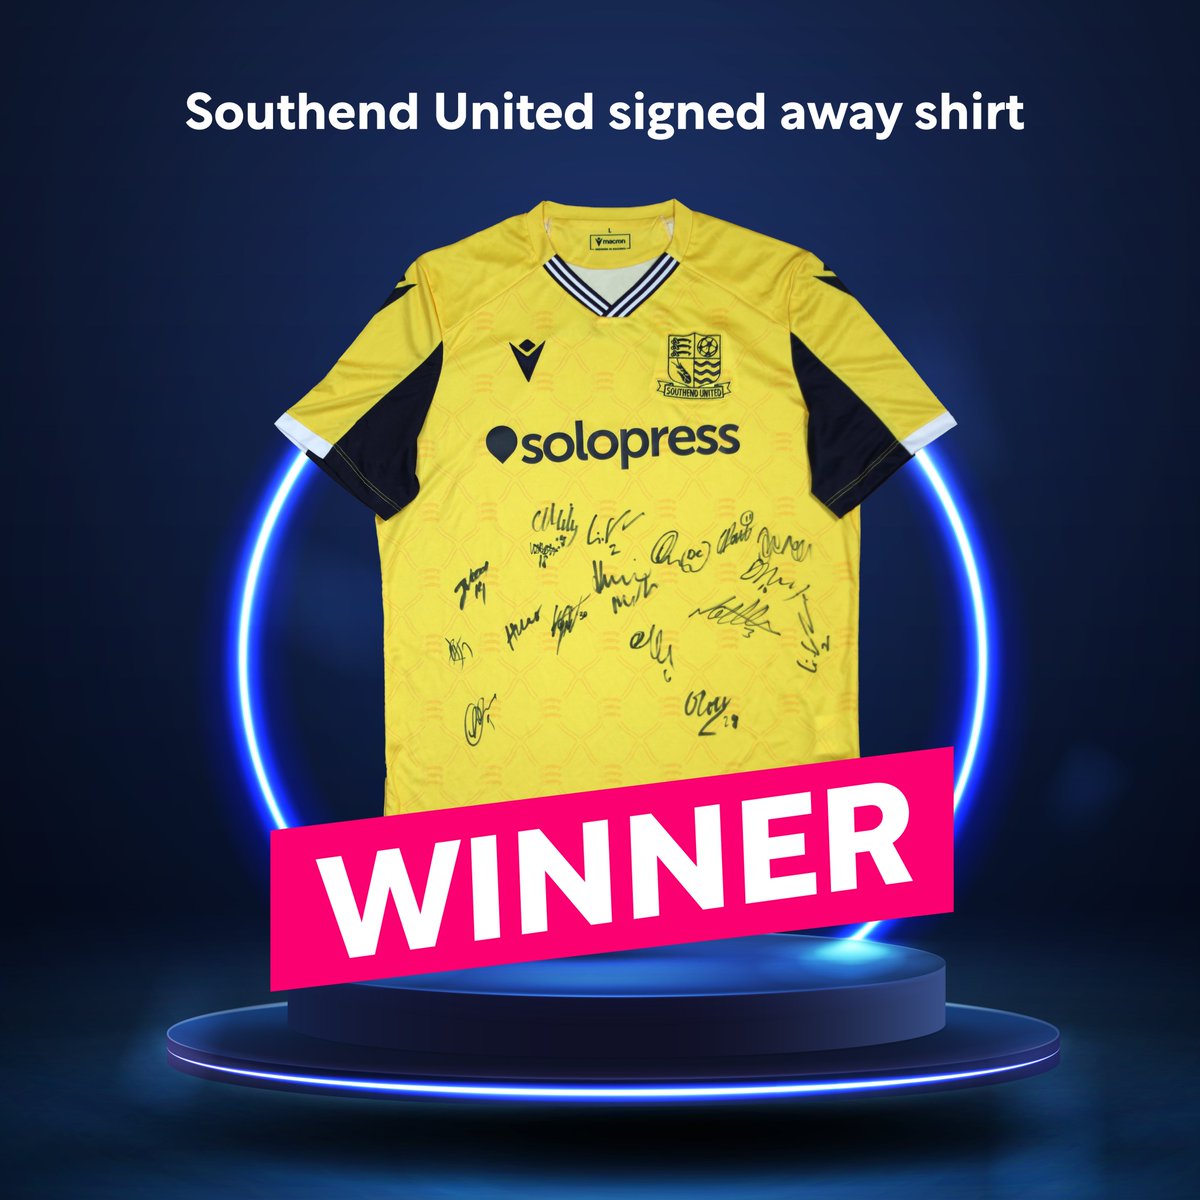 Hearing your favourite moments of this memorable season was fantastic - your passion for our club is electric! 🦐⚽️ Thank you to everyone who entered, we're pleased to announce our winner of the signed away shirt is David Baker 🙌